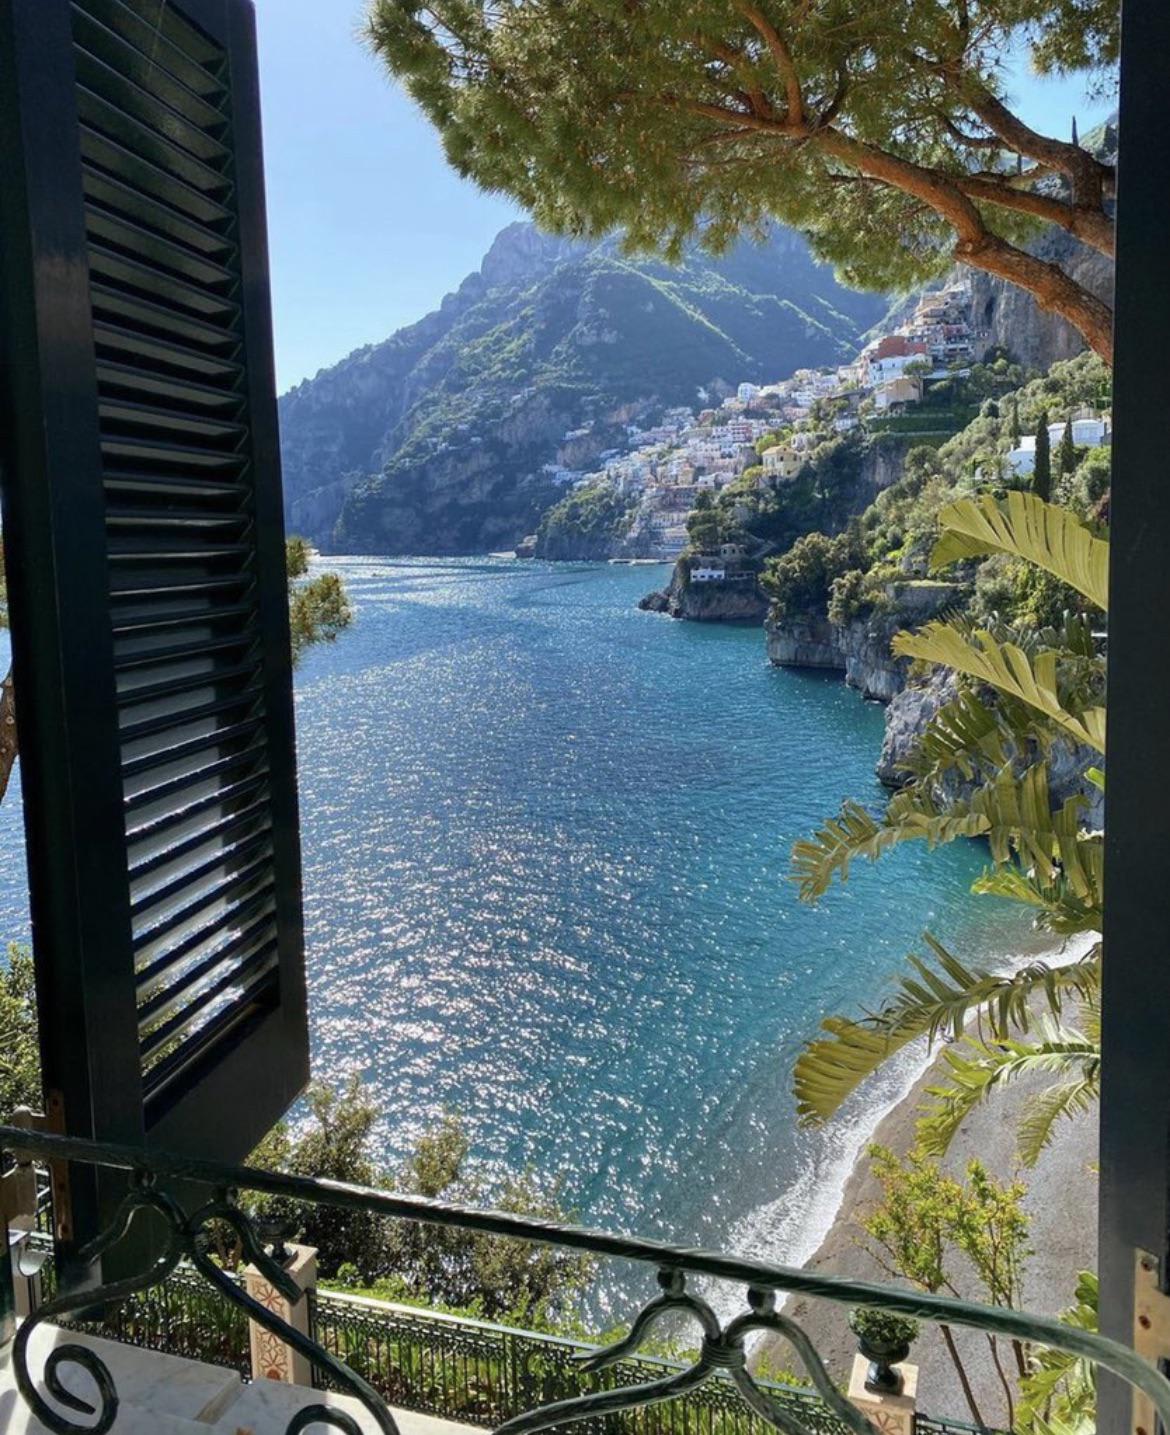 Please tell me where this is in Italy 🇮🇹 😢